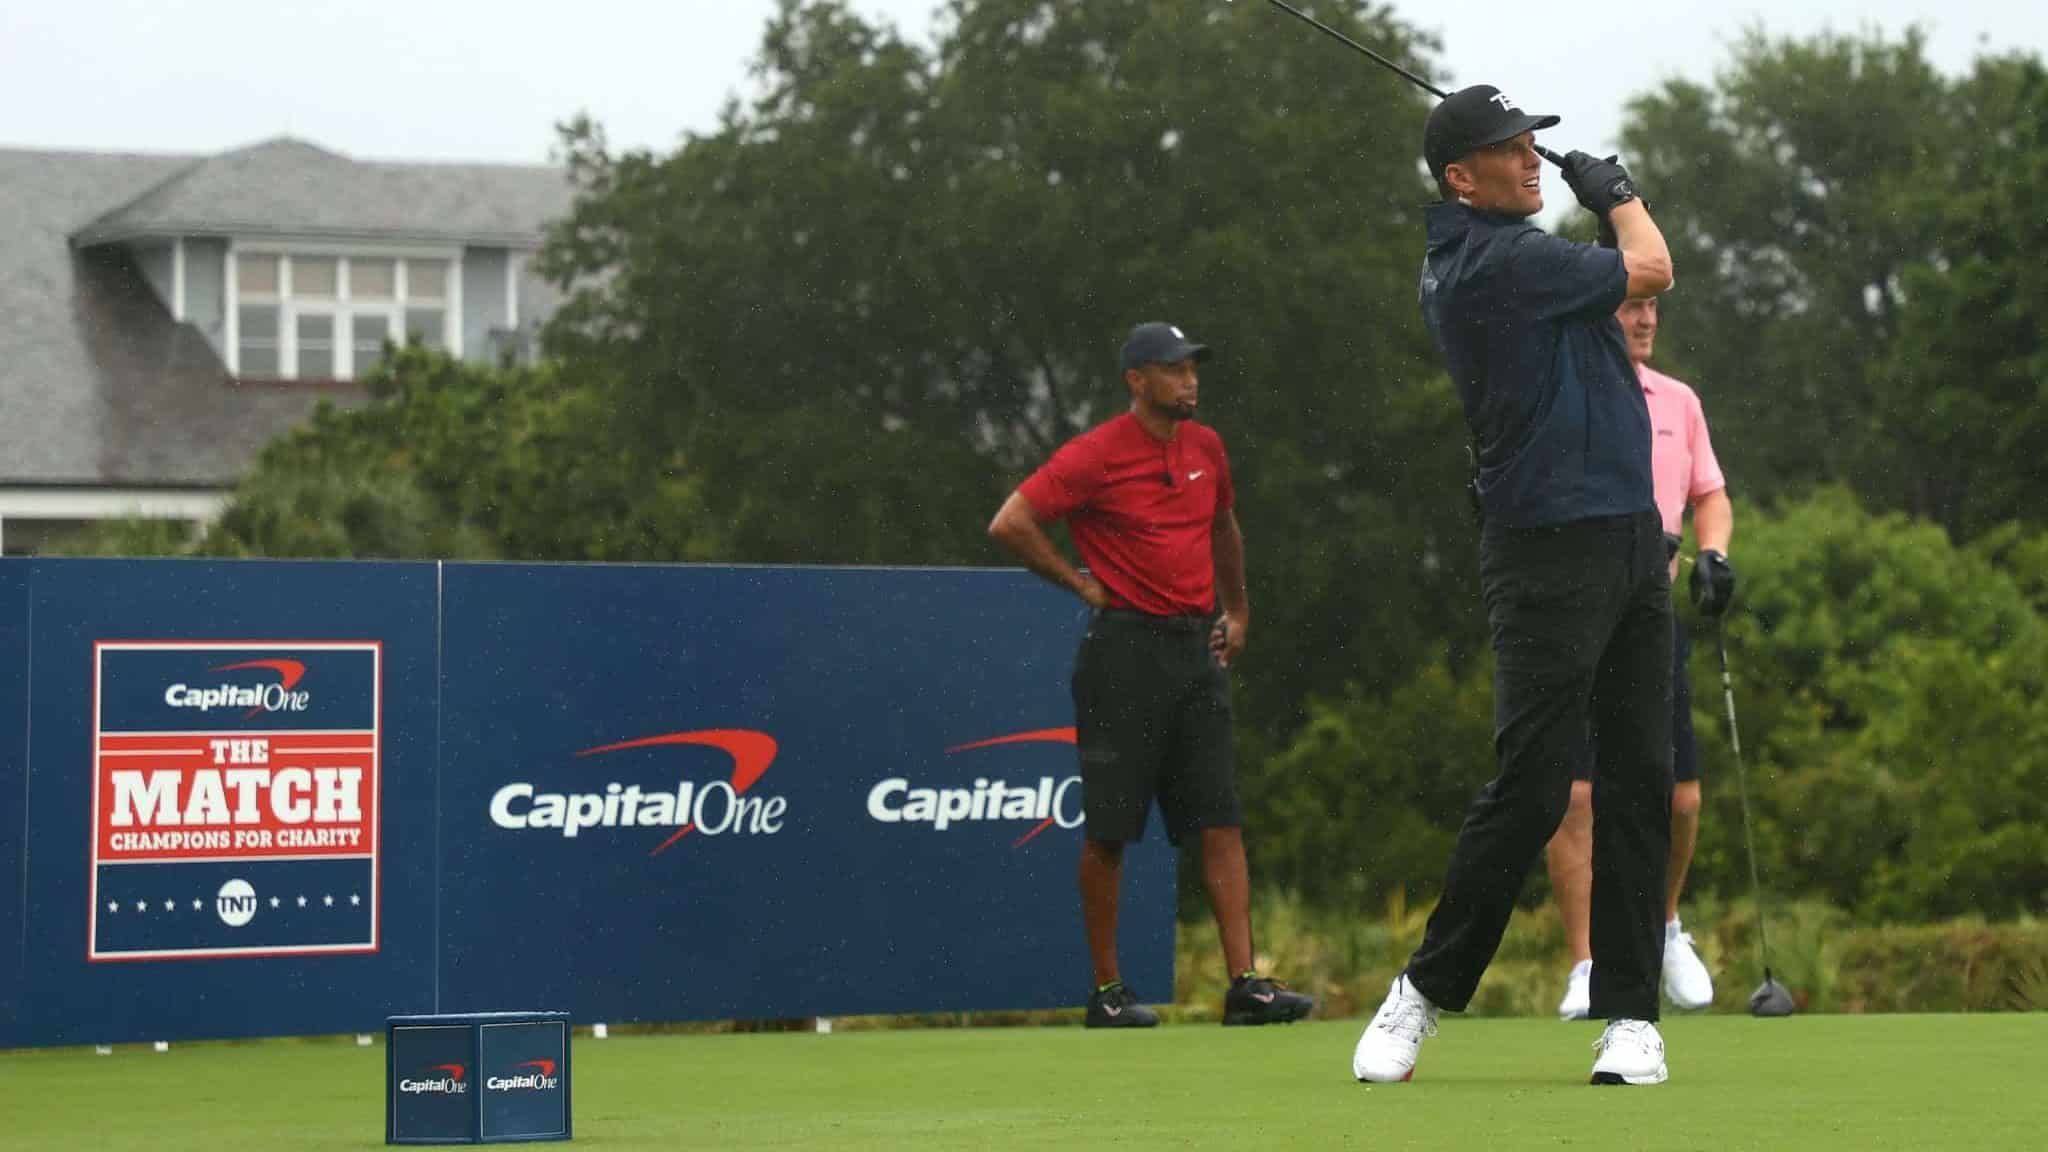 HOBE SOUND, FLORIDA - MAY 24: NFL player Tom Brady of the Tampa Bay Buccaneers plays his shot from the first tee as Tiger Woods an former NFL player Peyton Manning look on during The Match: Champions For Charity at Medalist Golf Club on May 24, 2020 in Hobe Sound, Florida.